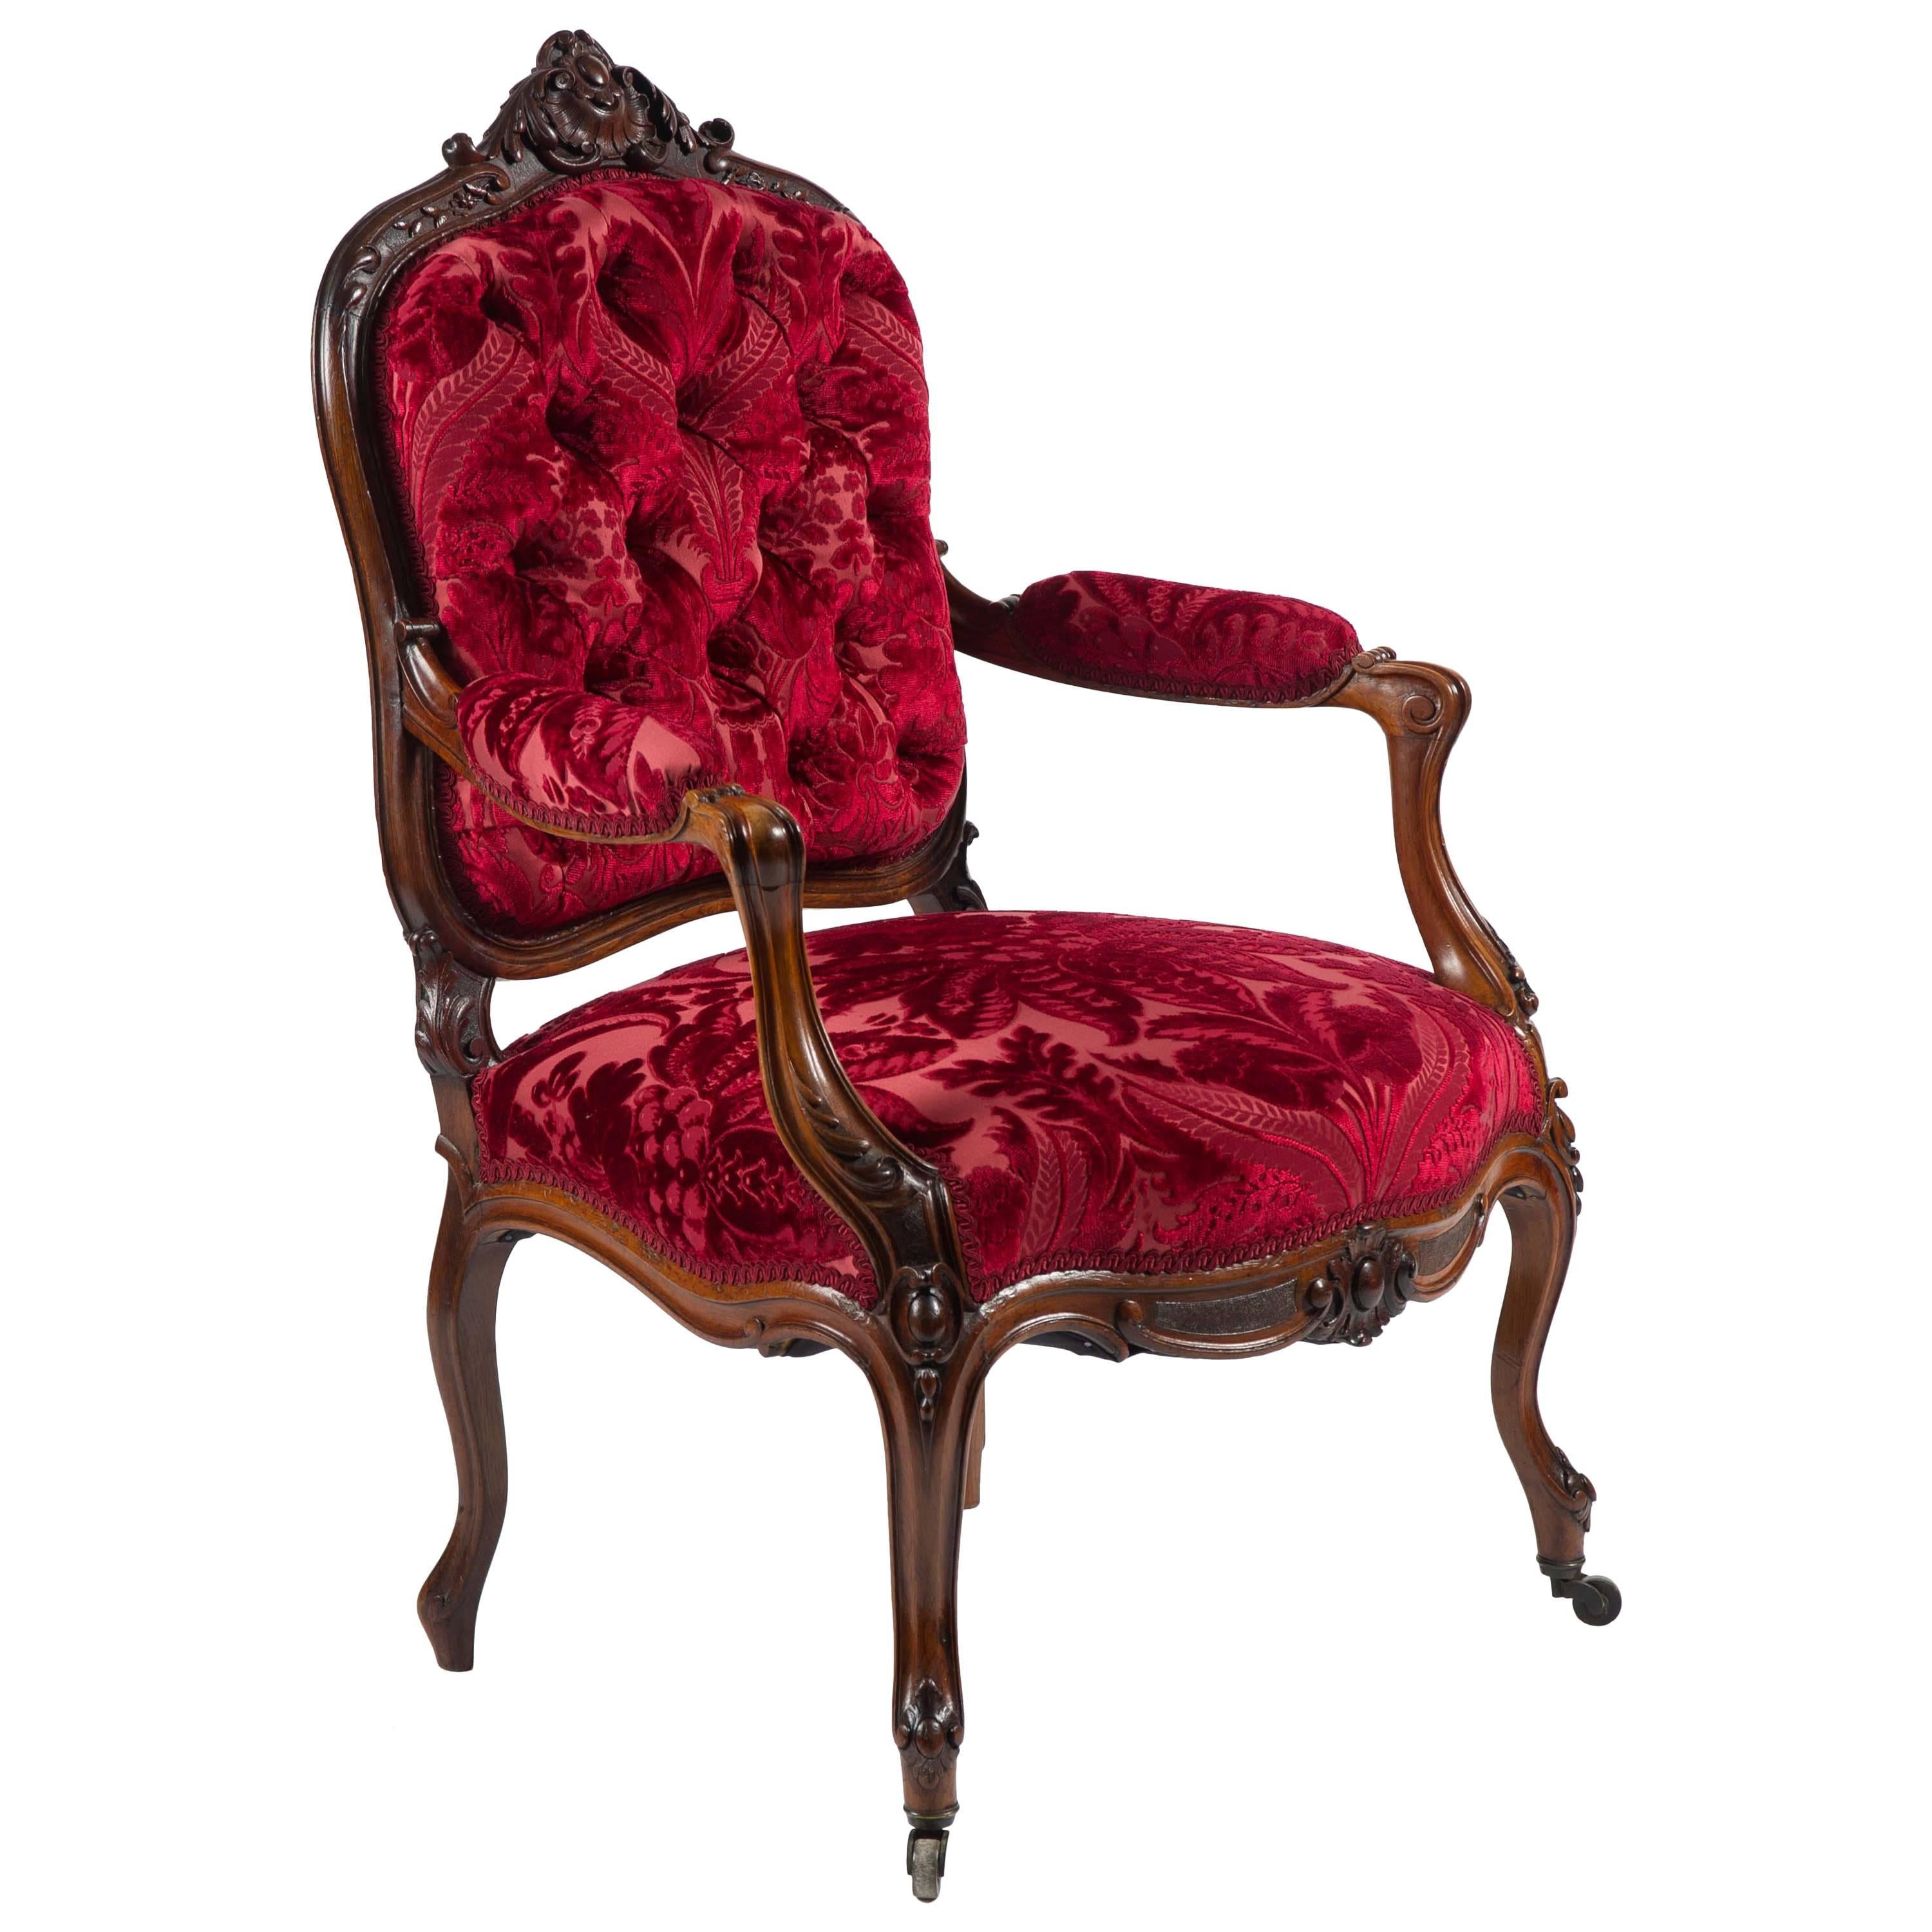 Mid-19th Century Carved Rosewood Open Armchair in the French Style